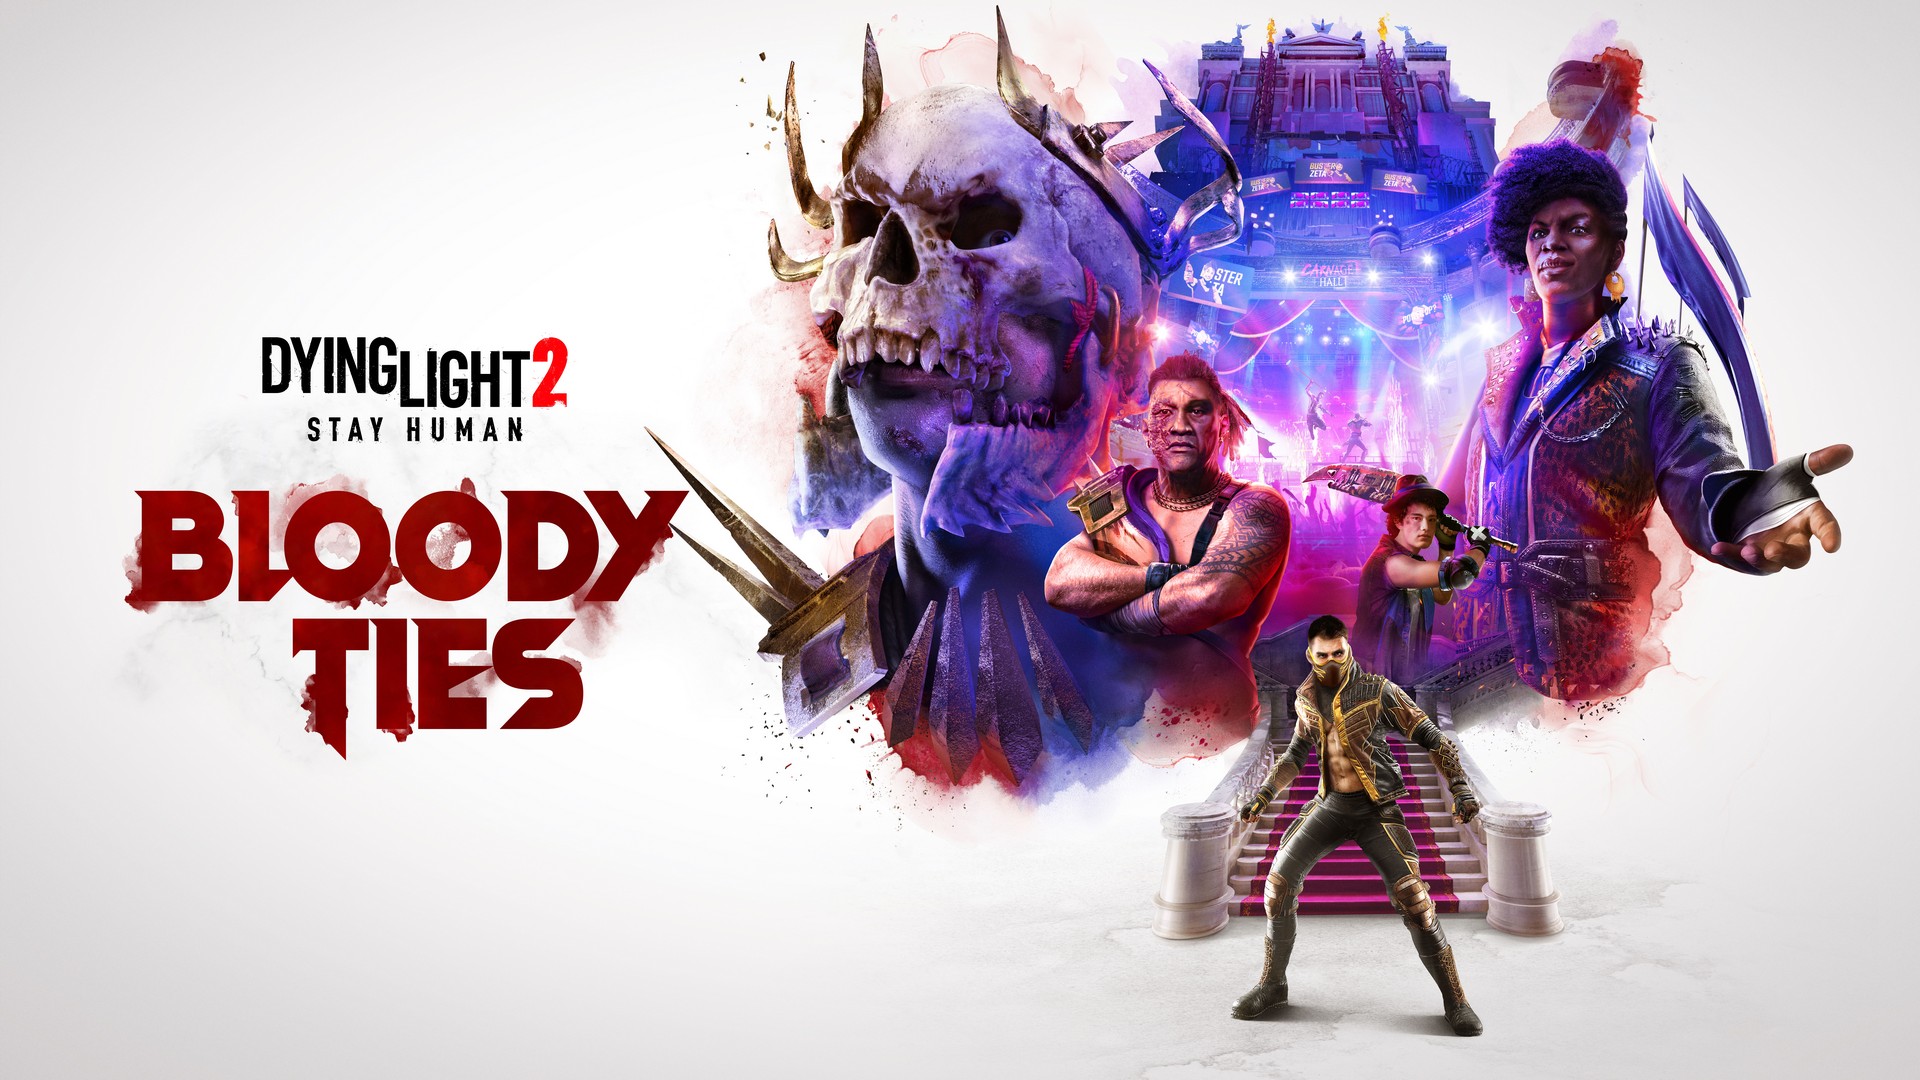 Dying Light 2 Stay Human “Bloody Ties” DLC Out Now For PC, PlayStation, and Xbox